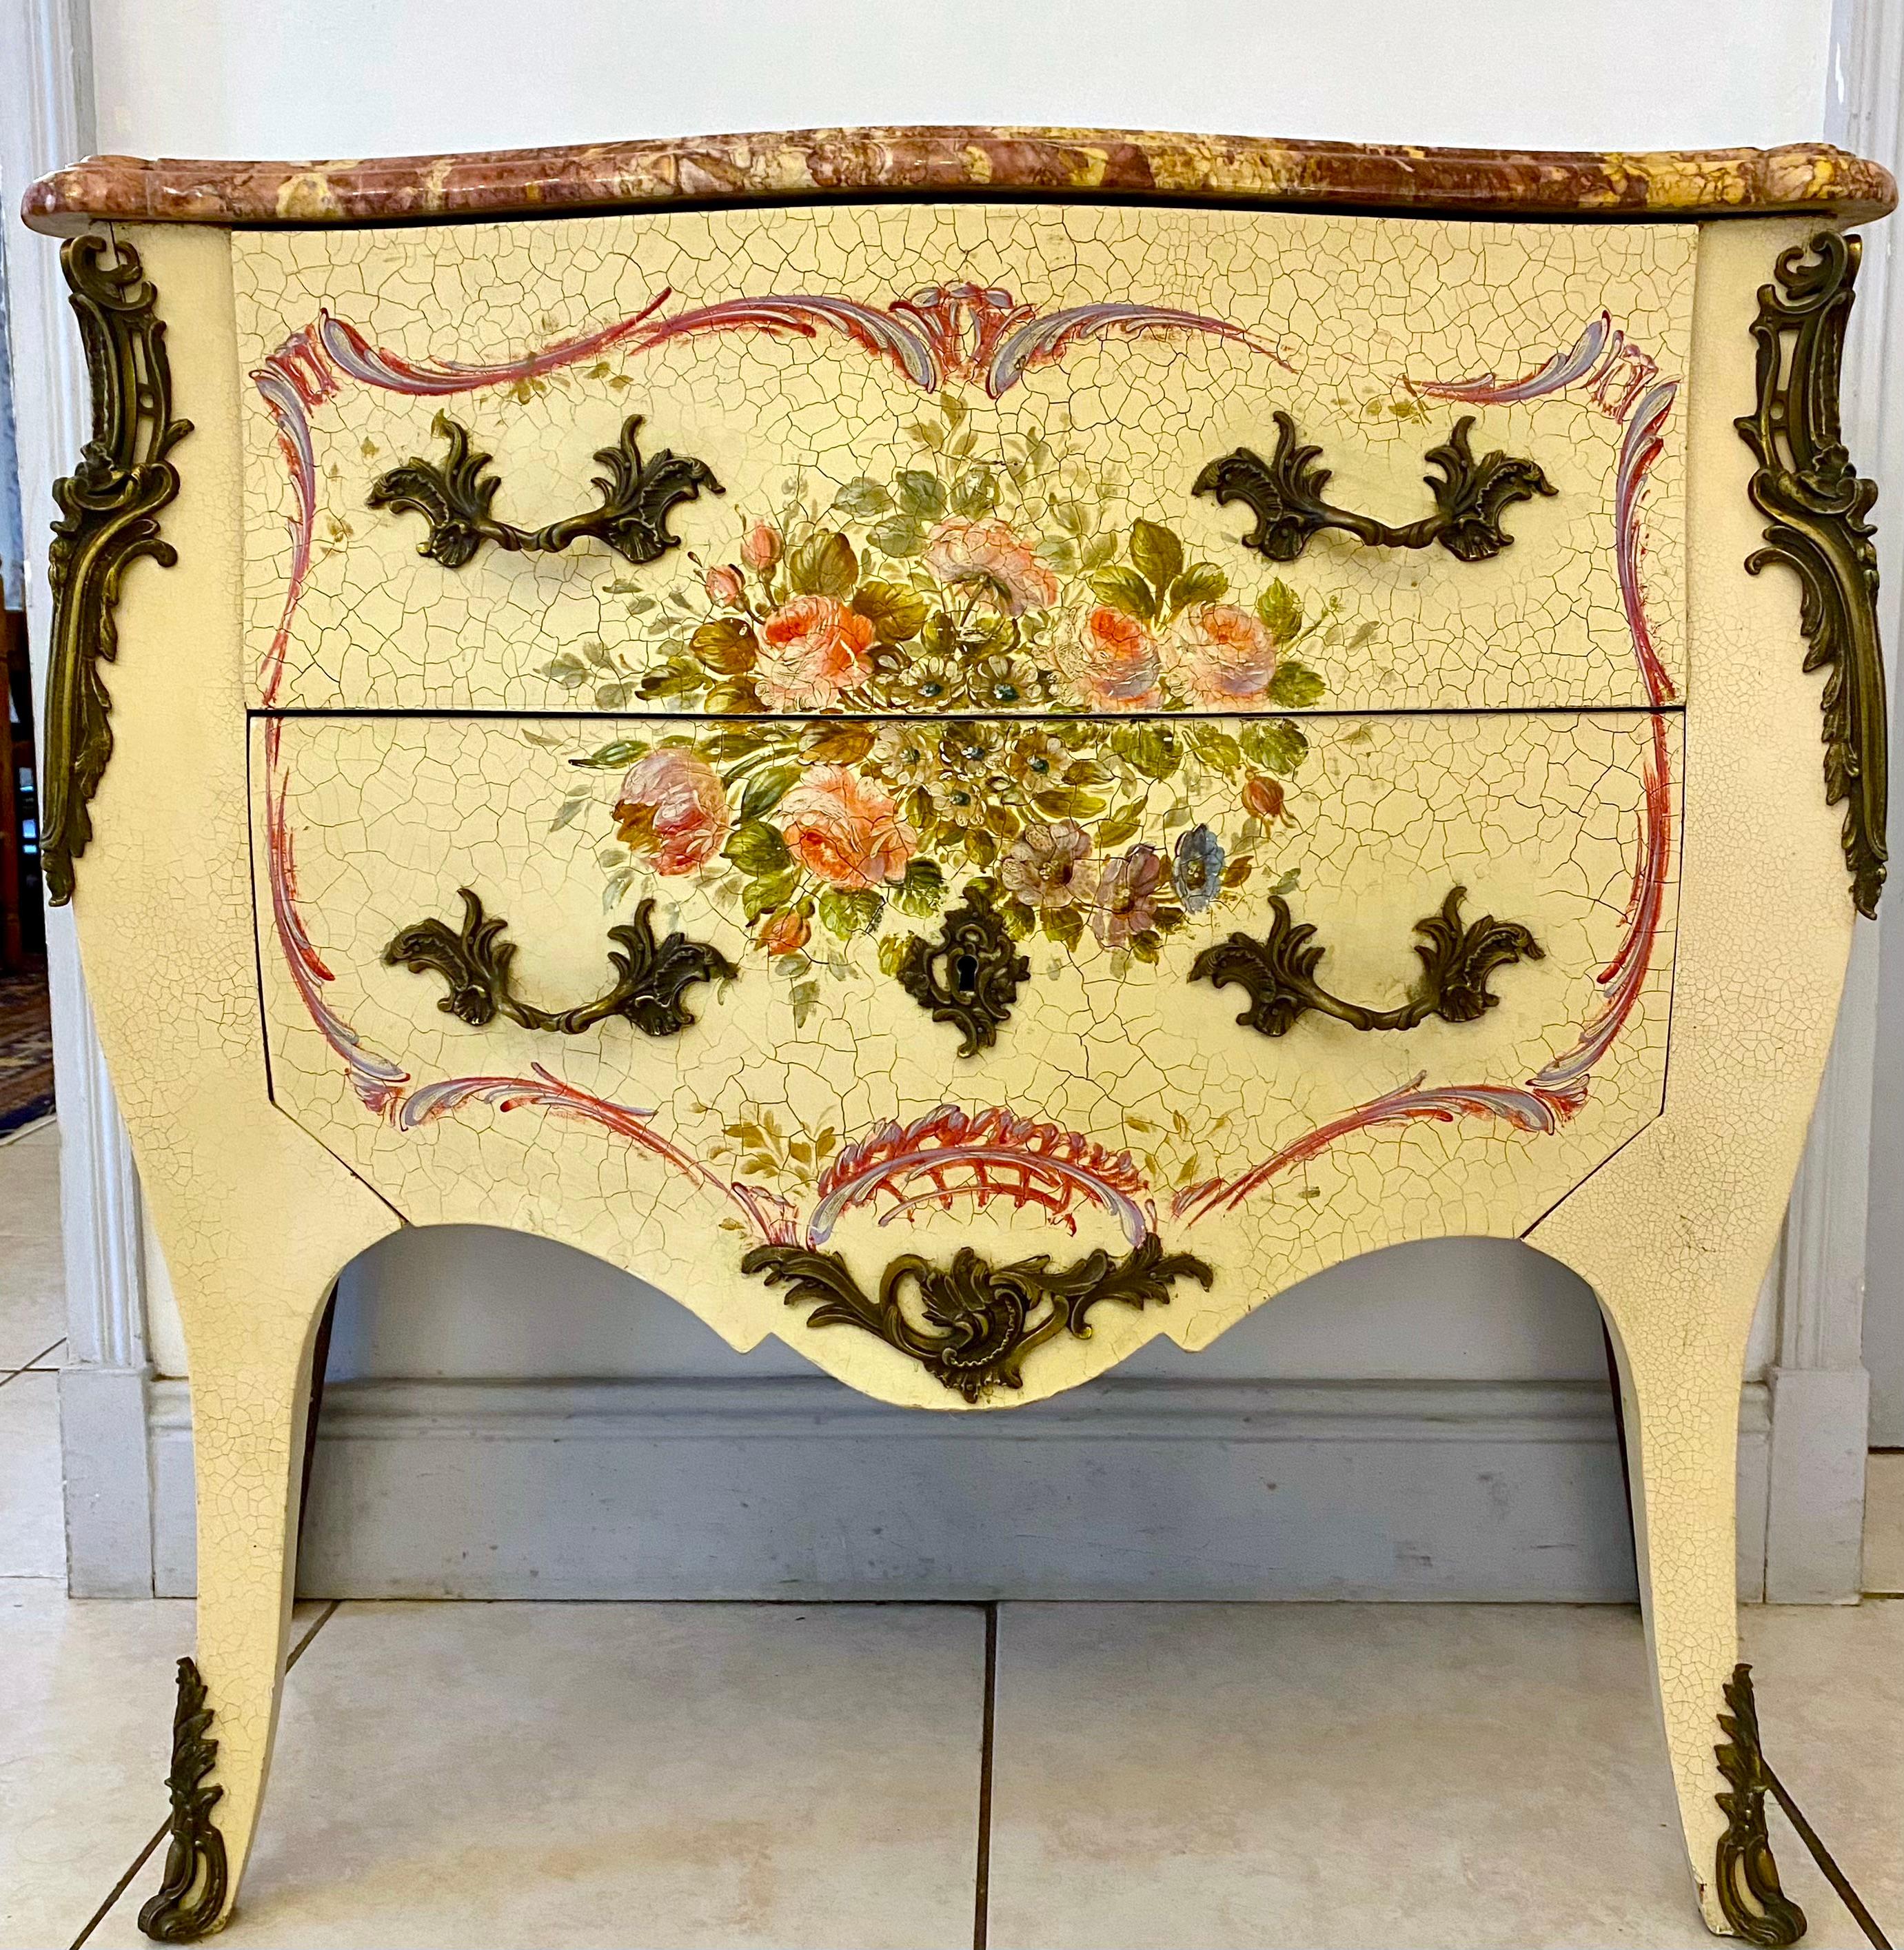 Italian, Venetian or Genoese chest of drawers, in painted wood with very pretty floral decoration from the end of the 19th century in the Louis XV style.
It opens with two drawers and has saber legs.
The top is dressed in Peach Blossom colored